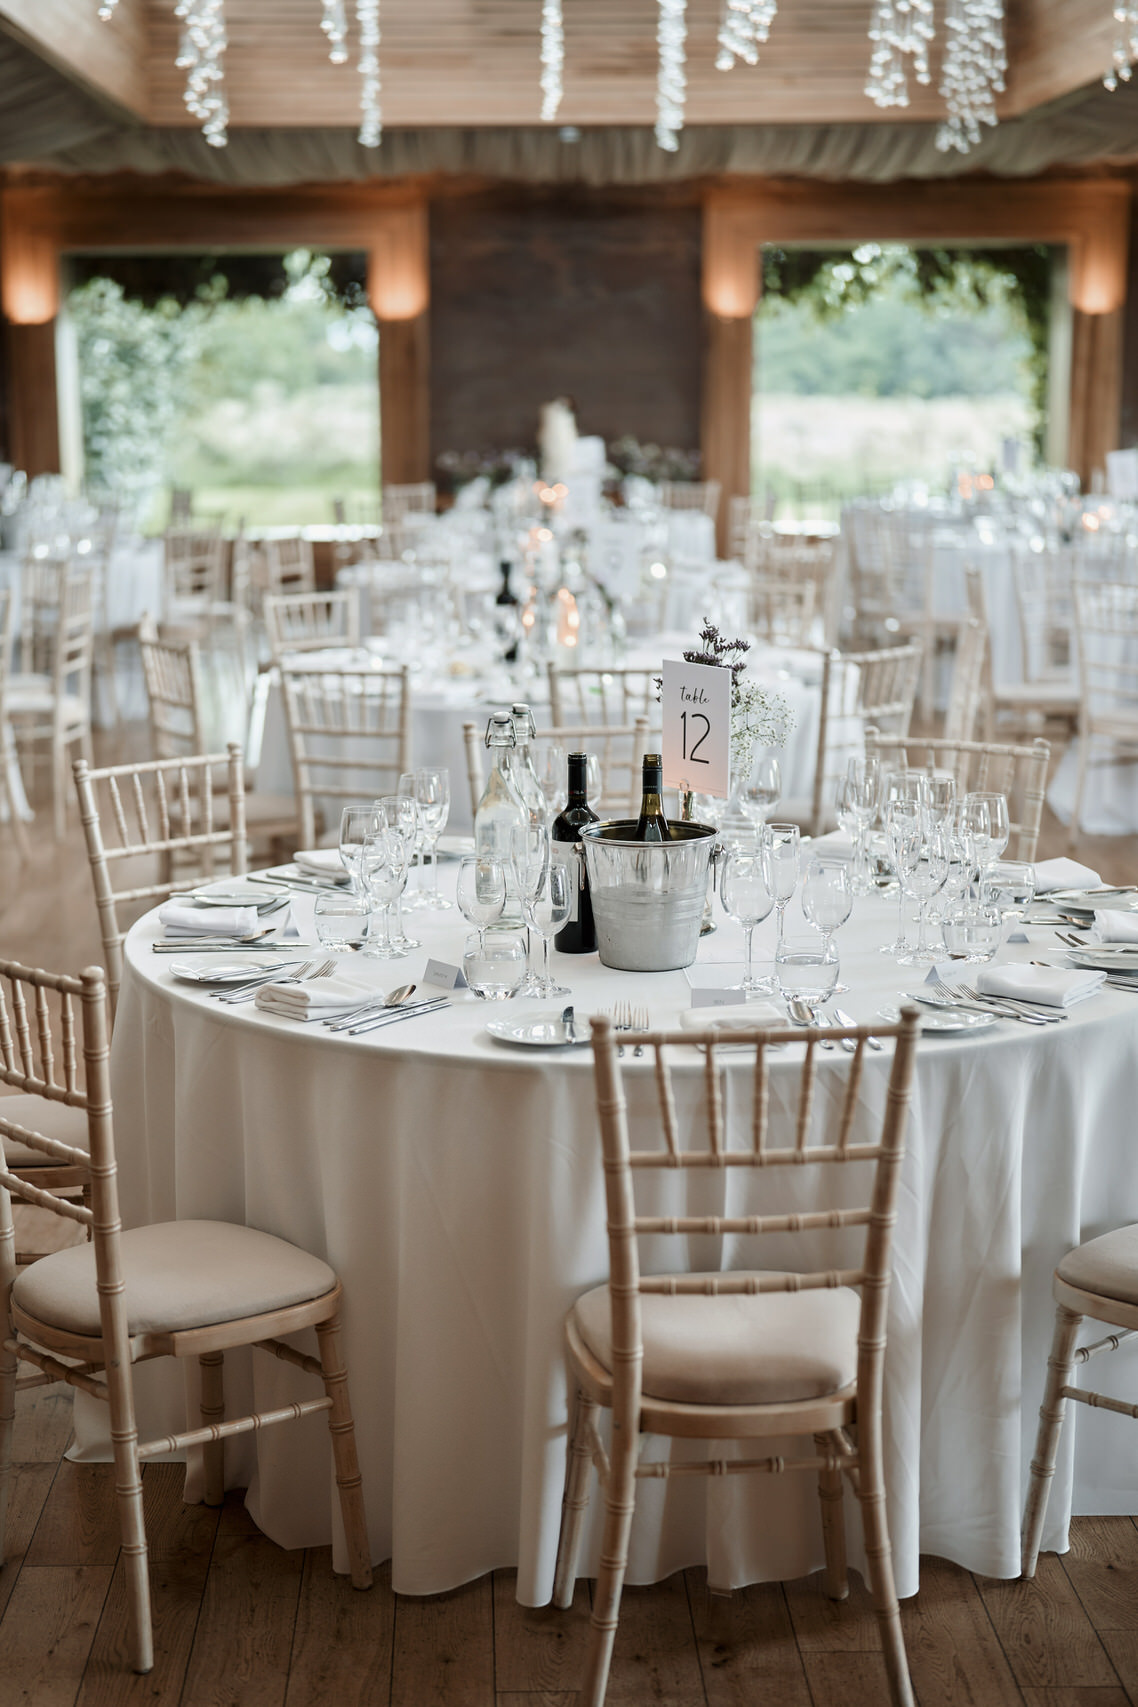 A wedding party area arranged with white tables and chairs.